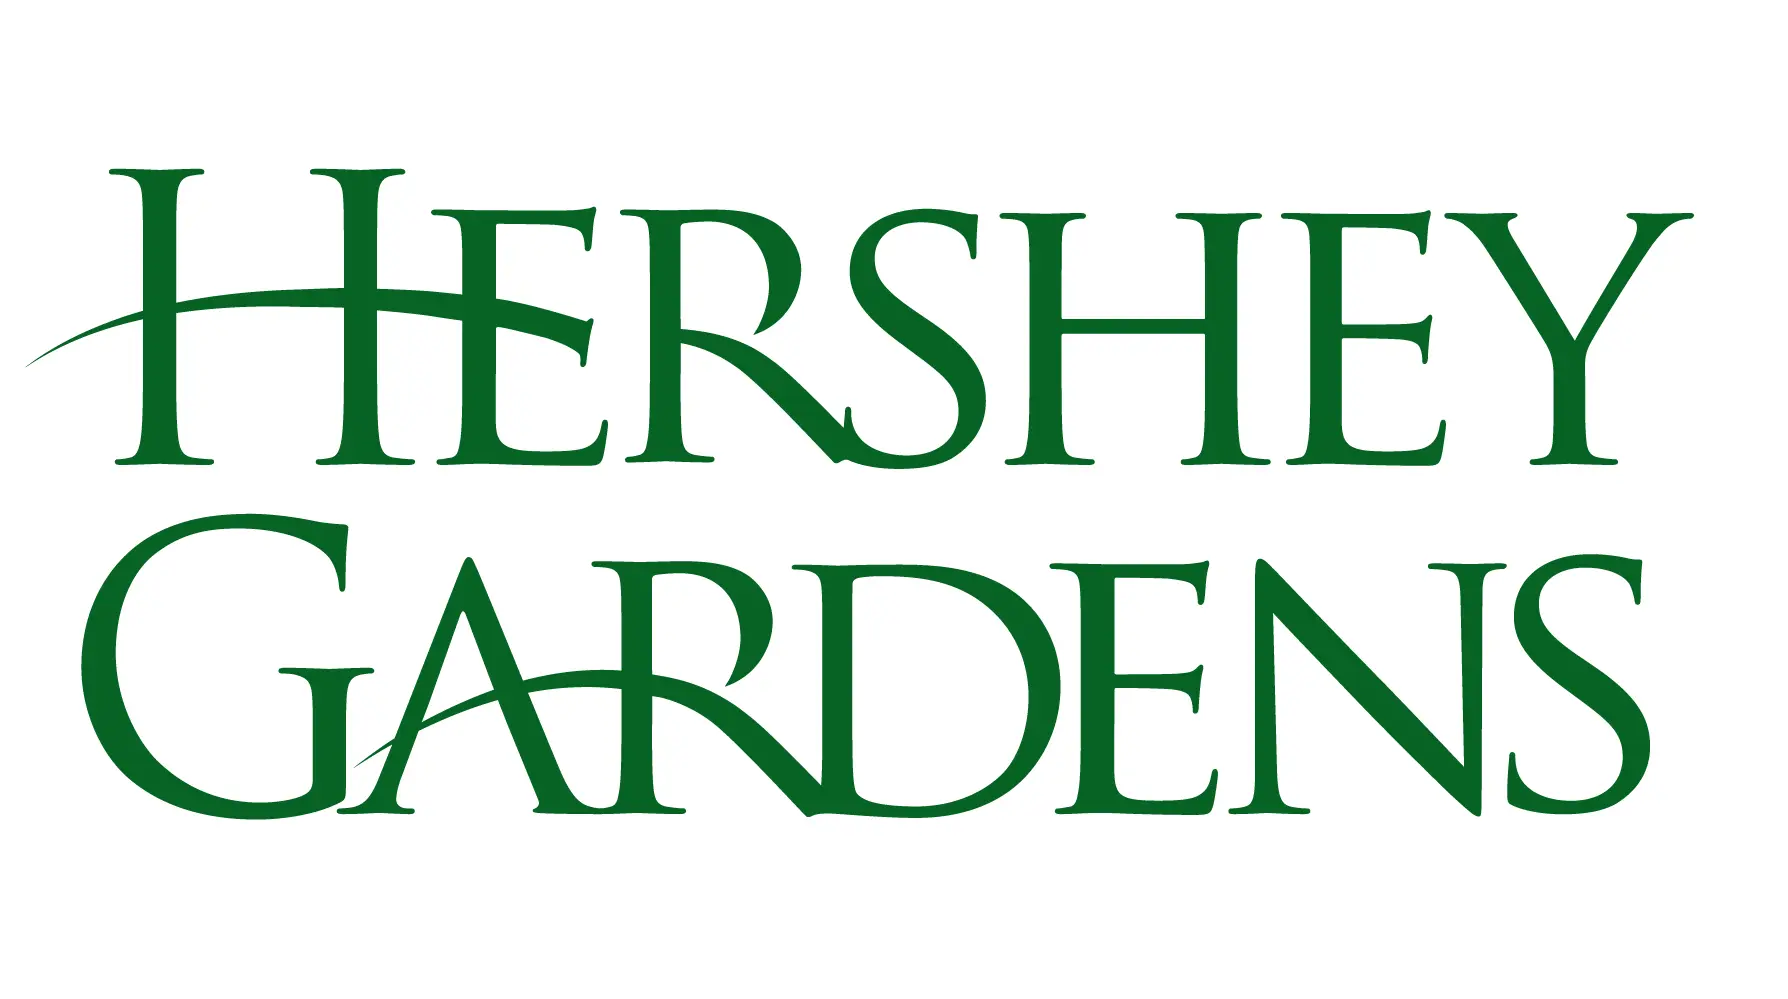 a green hershey gardens logo on a white background